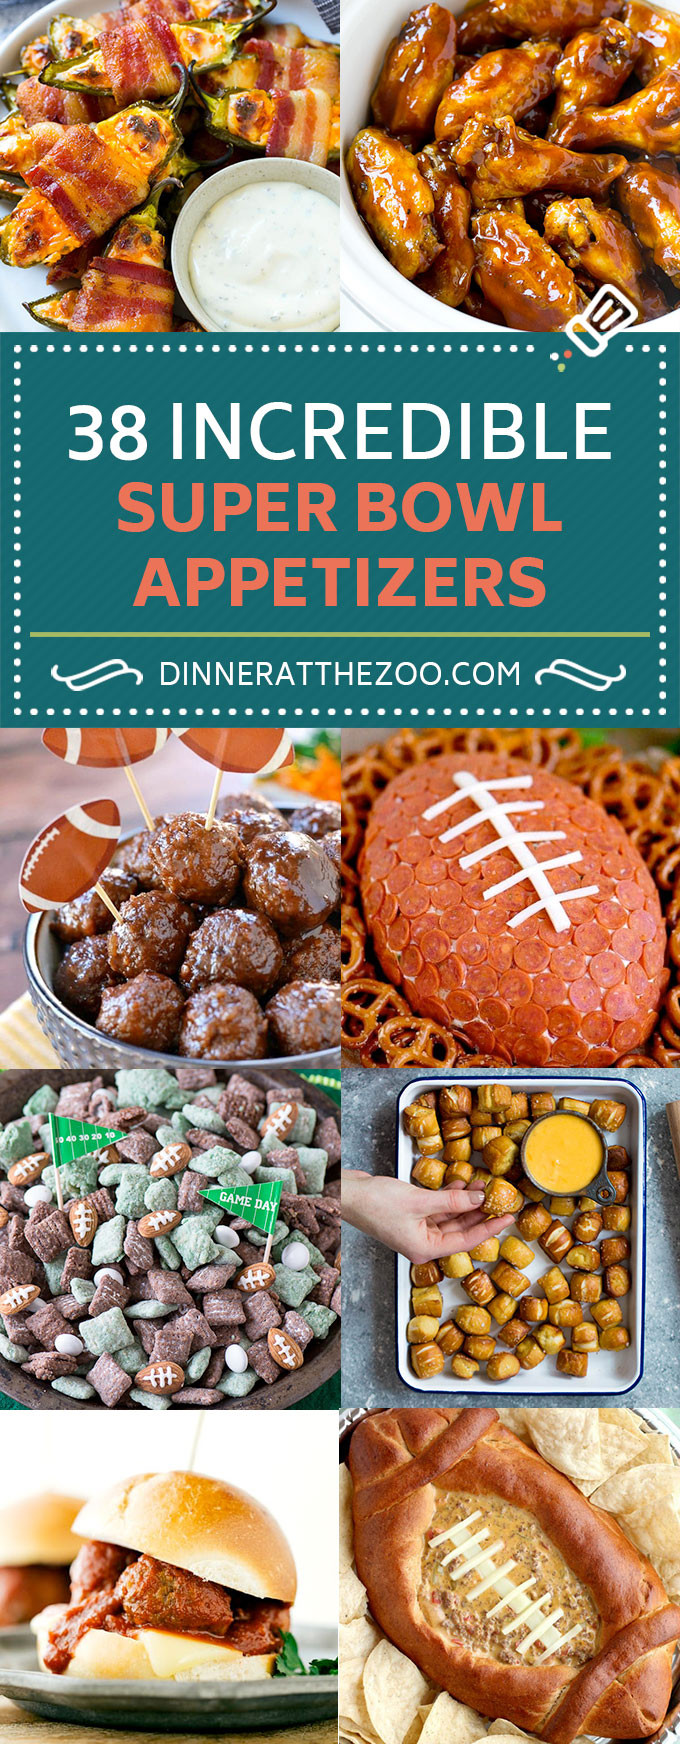 Superbowl Snacks Recipes
 45 Incredible Super Bowl Appetizer Recipes Dinner at the Zoo